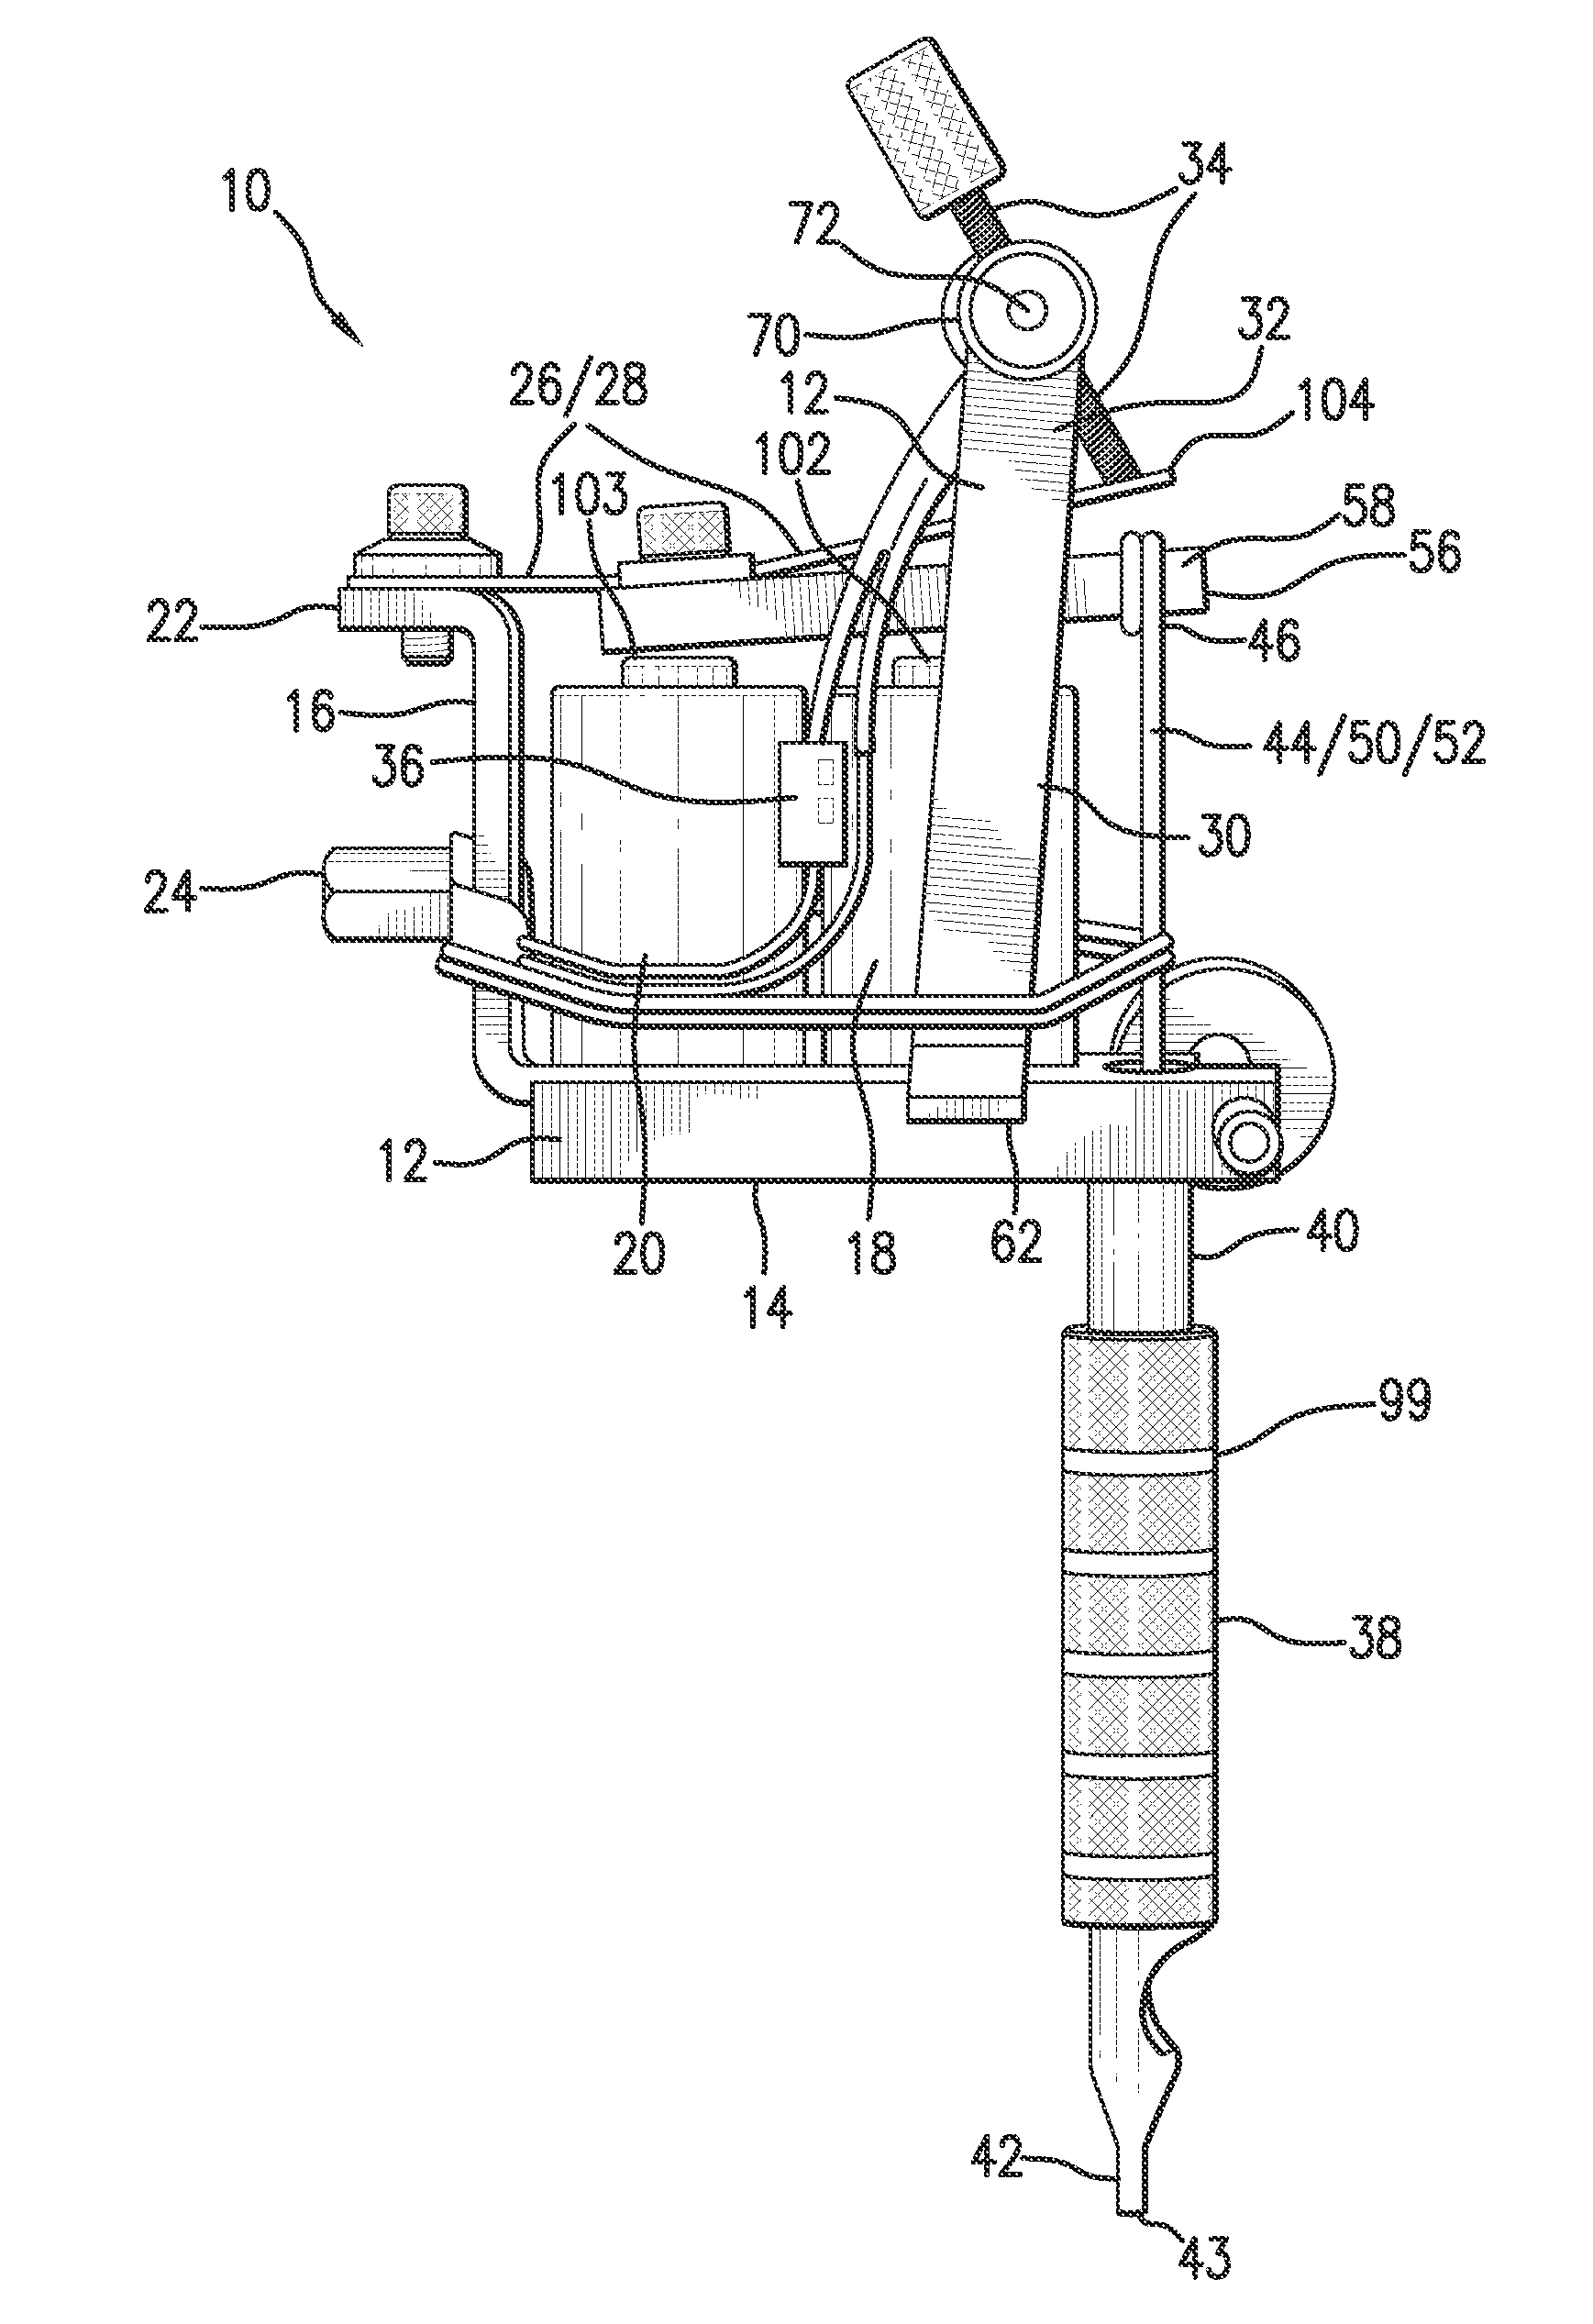 Control device for a tattoo machine, and tattoo system